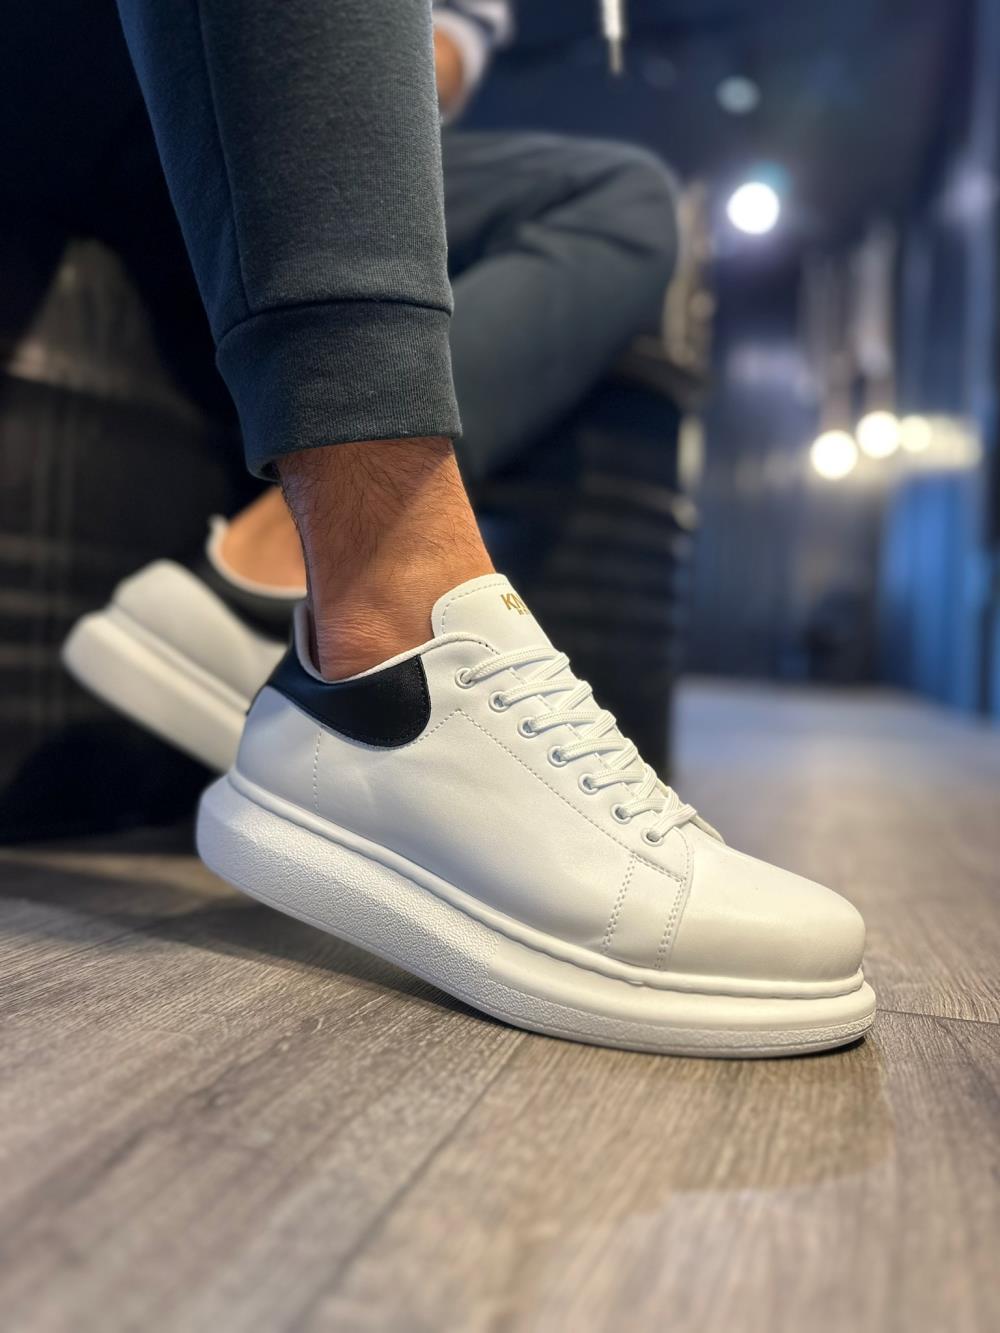 Men's White High Sole Casual Sneaker Sports Shoes - STREETMODE ™